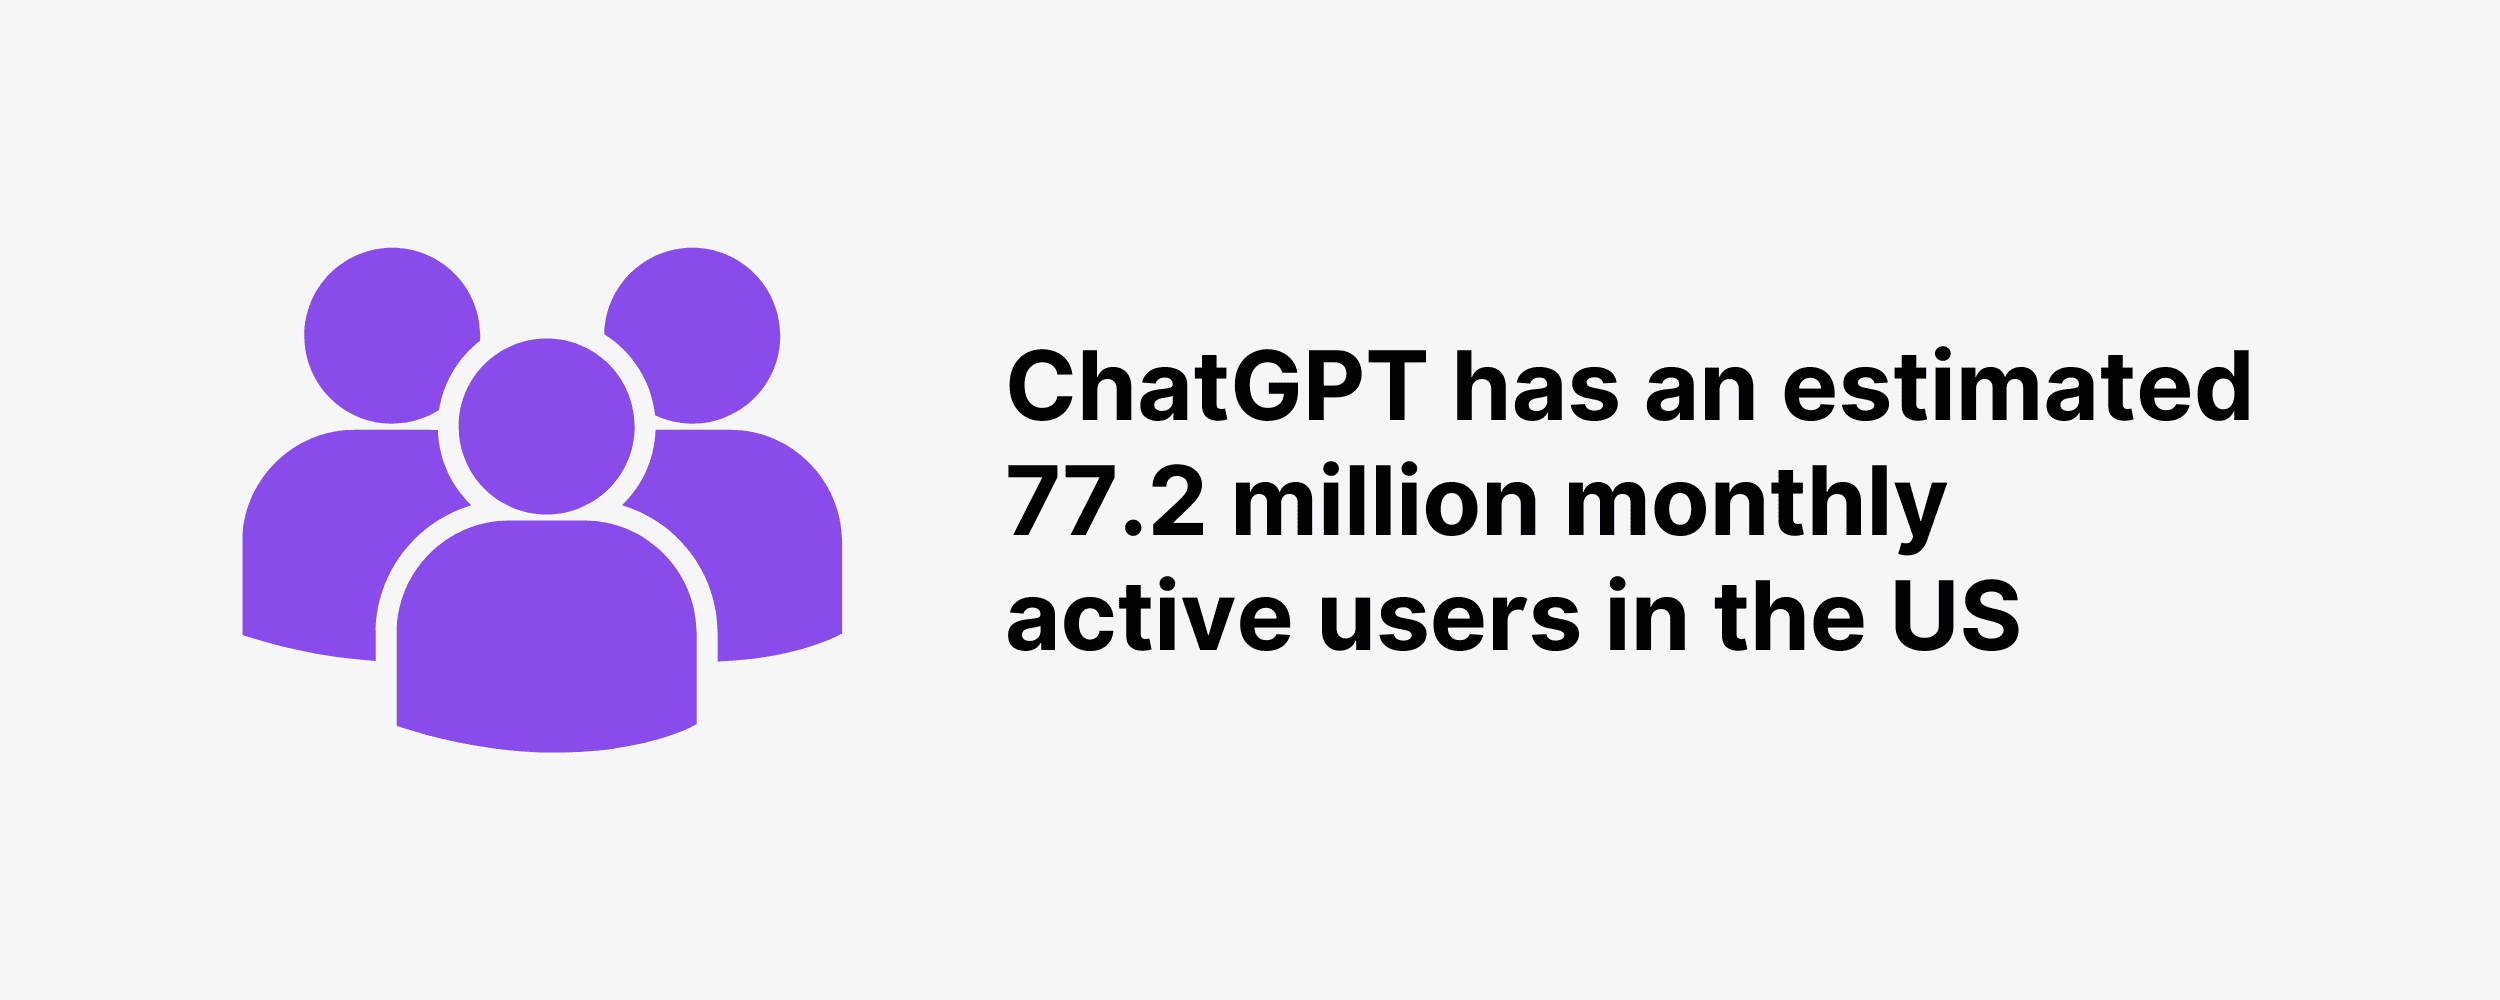 ChatGPT has an estimated 77.2 million monthly active users in the US